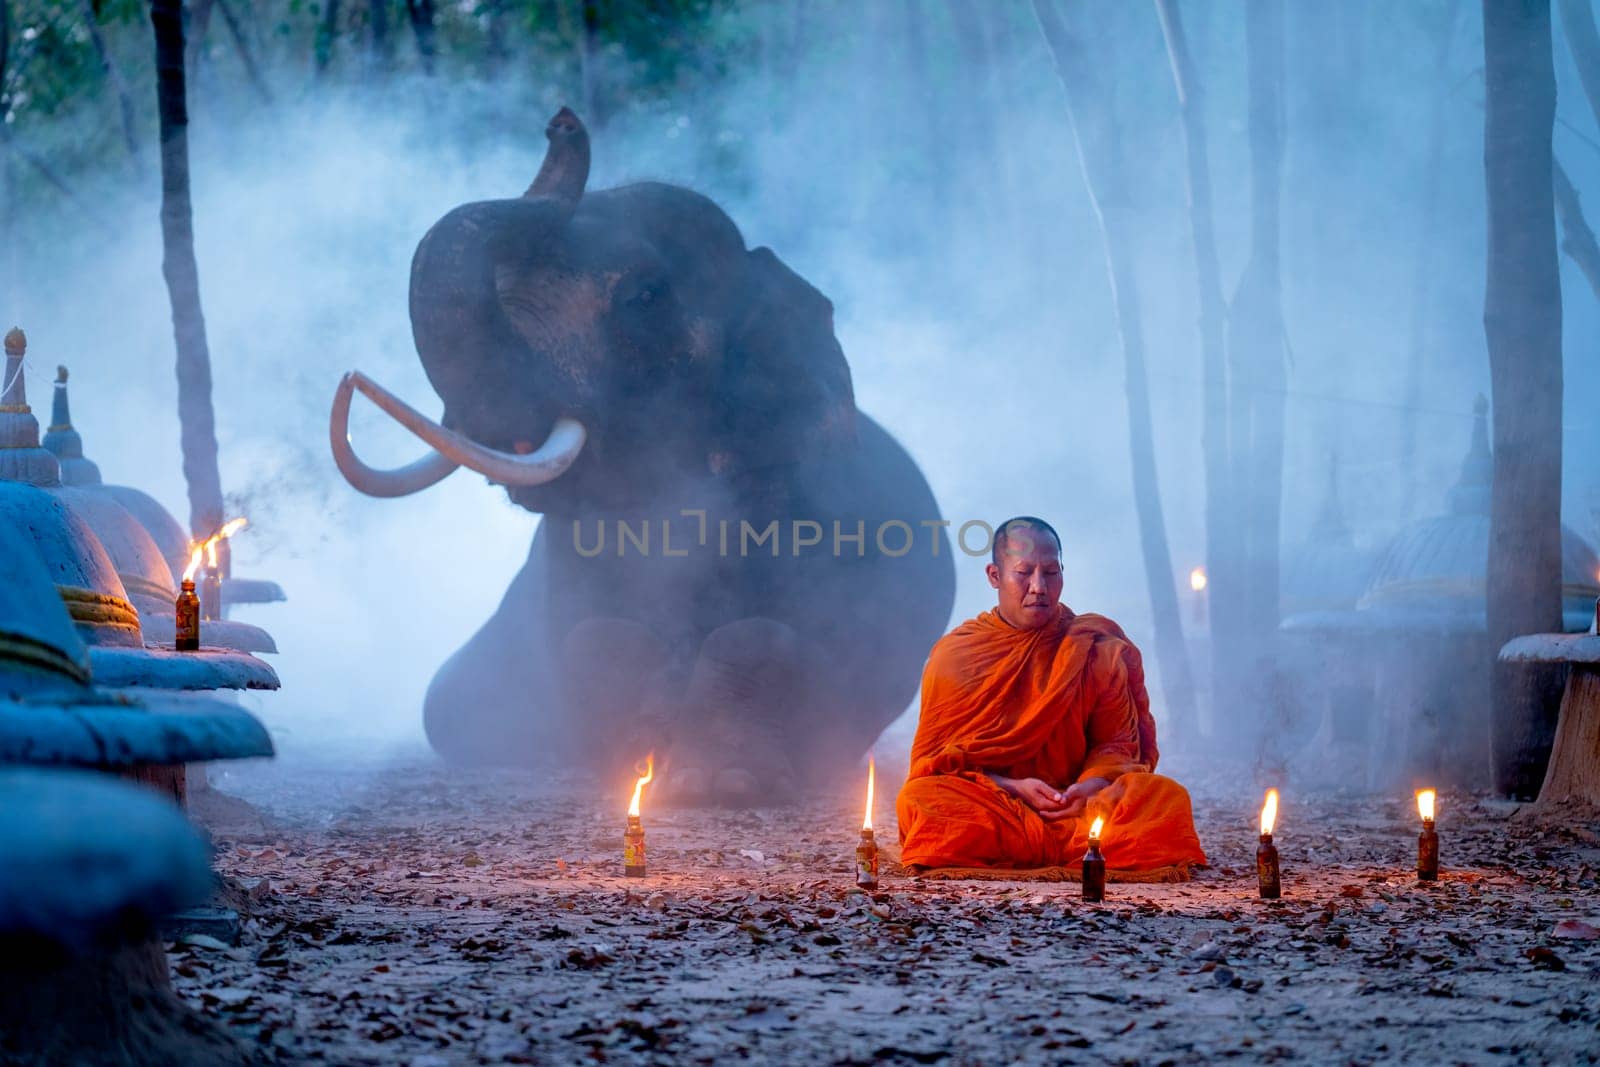 One monk sit and stay in meditate position in front of elephant lie down on background at night in concept of lifestyle relate between human and wildlife. by nrradmin